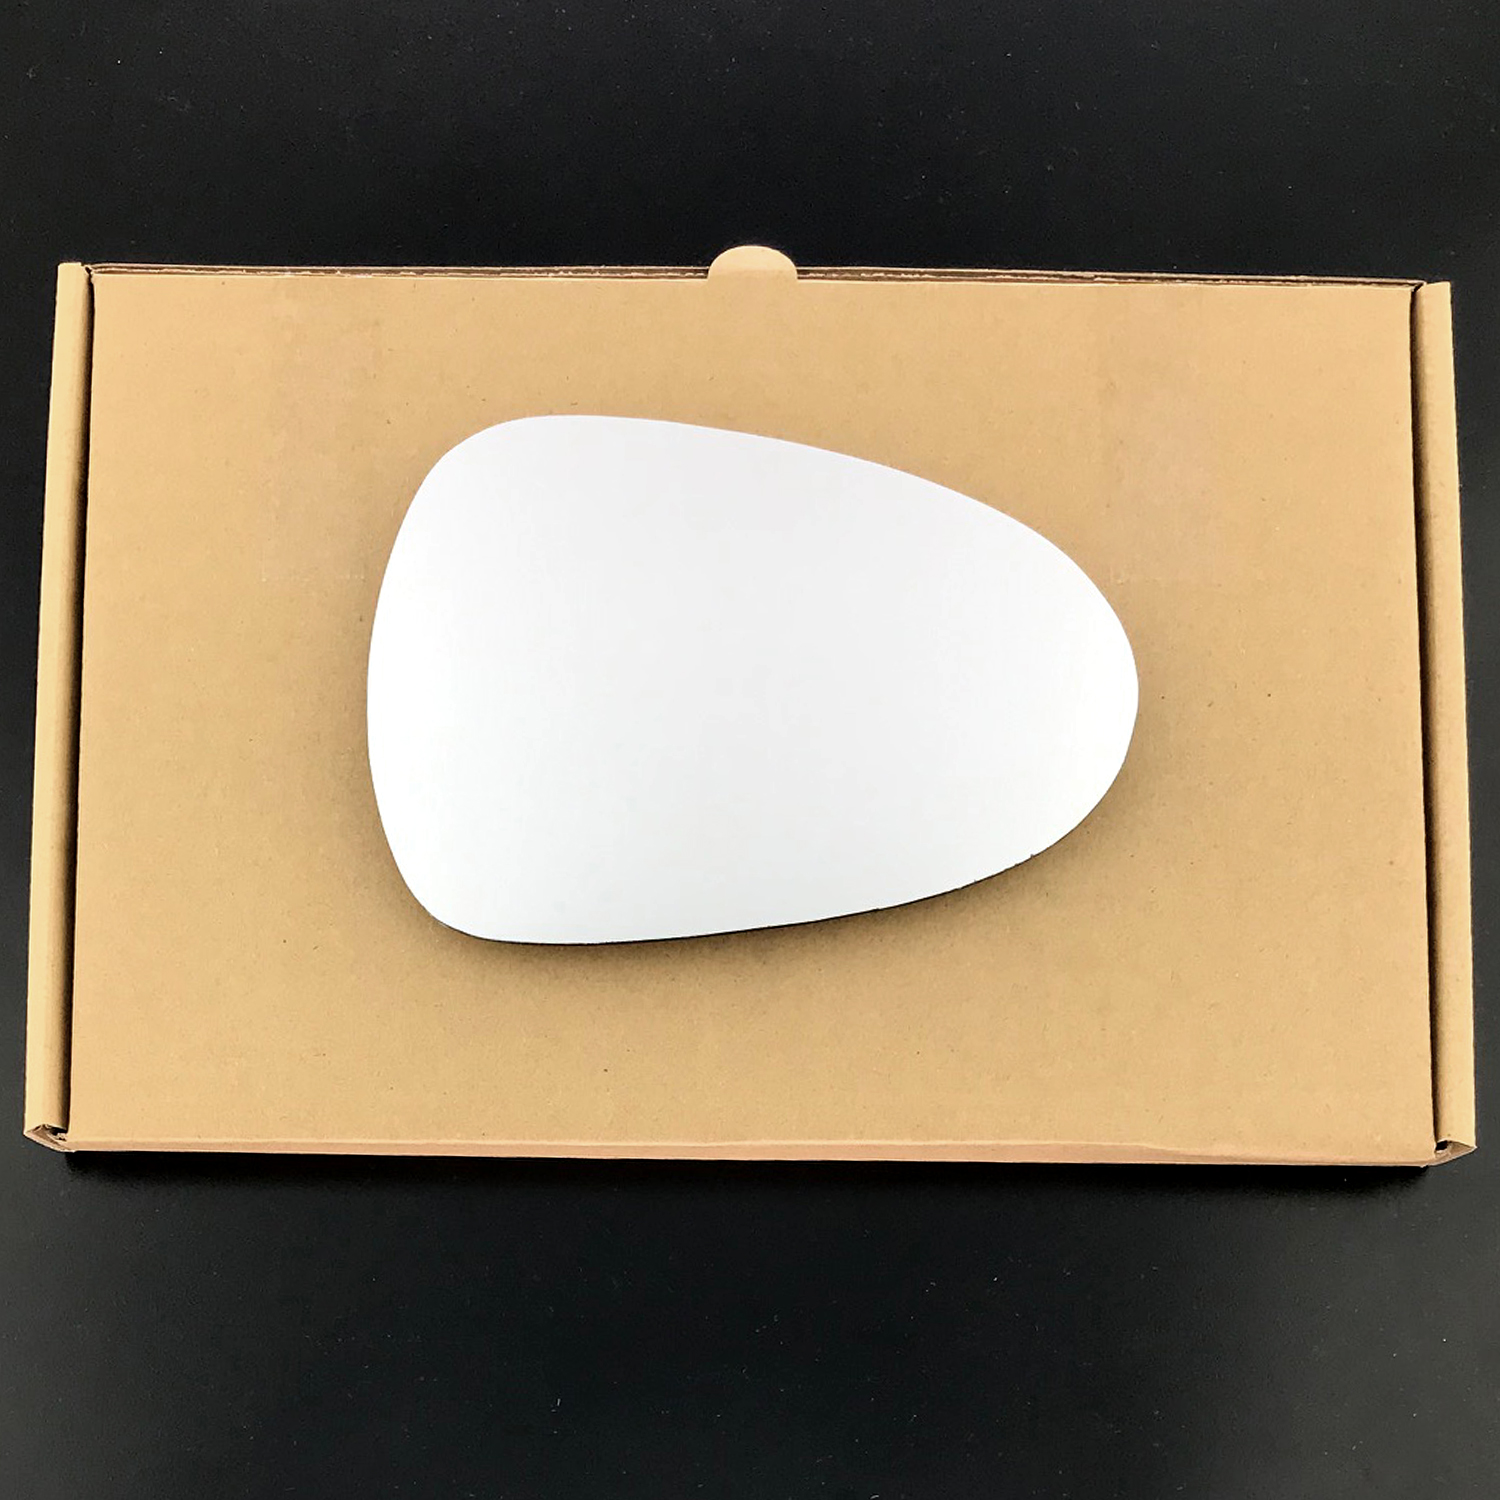 SEAT Ibiza Wing Mirror Glass RIGHT HAND ( UK Driver Side ) 2008 SEP to 2018 – Convex Wing Mirror